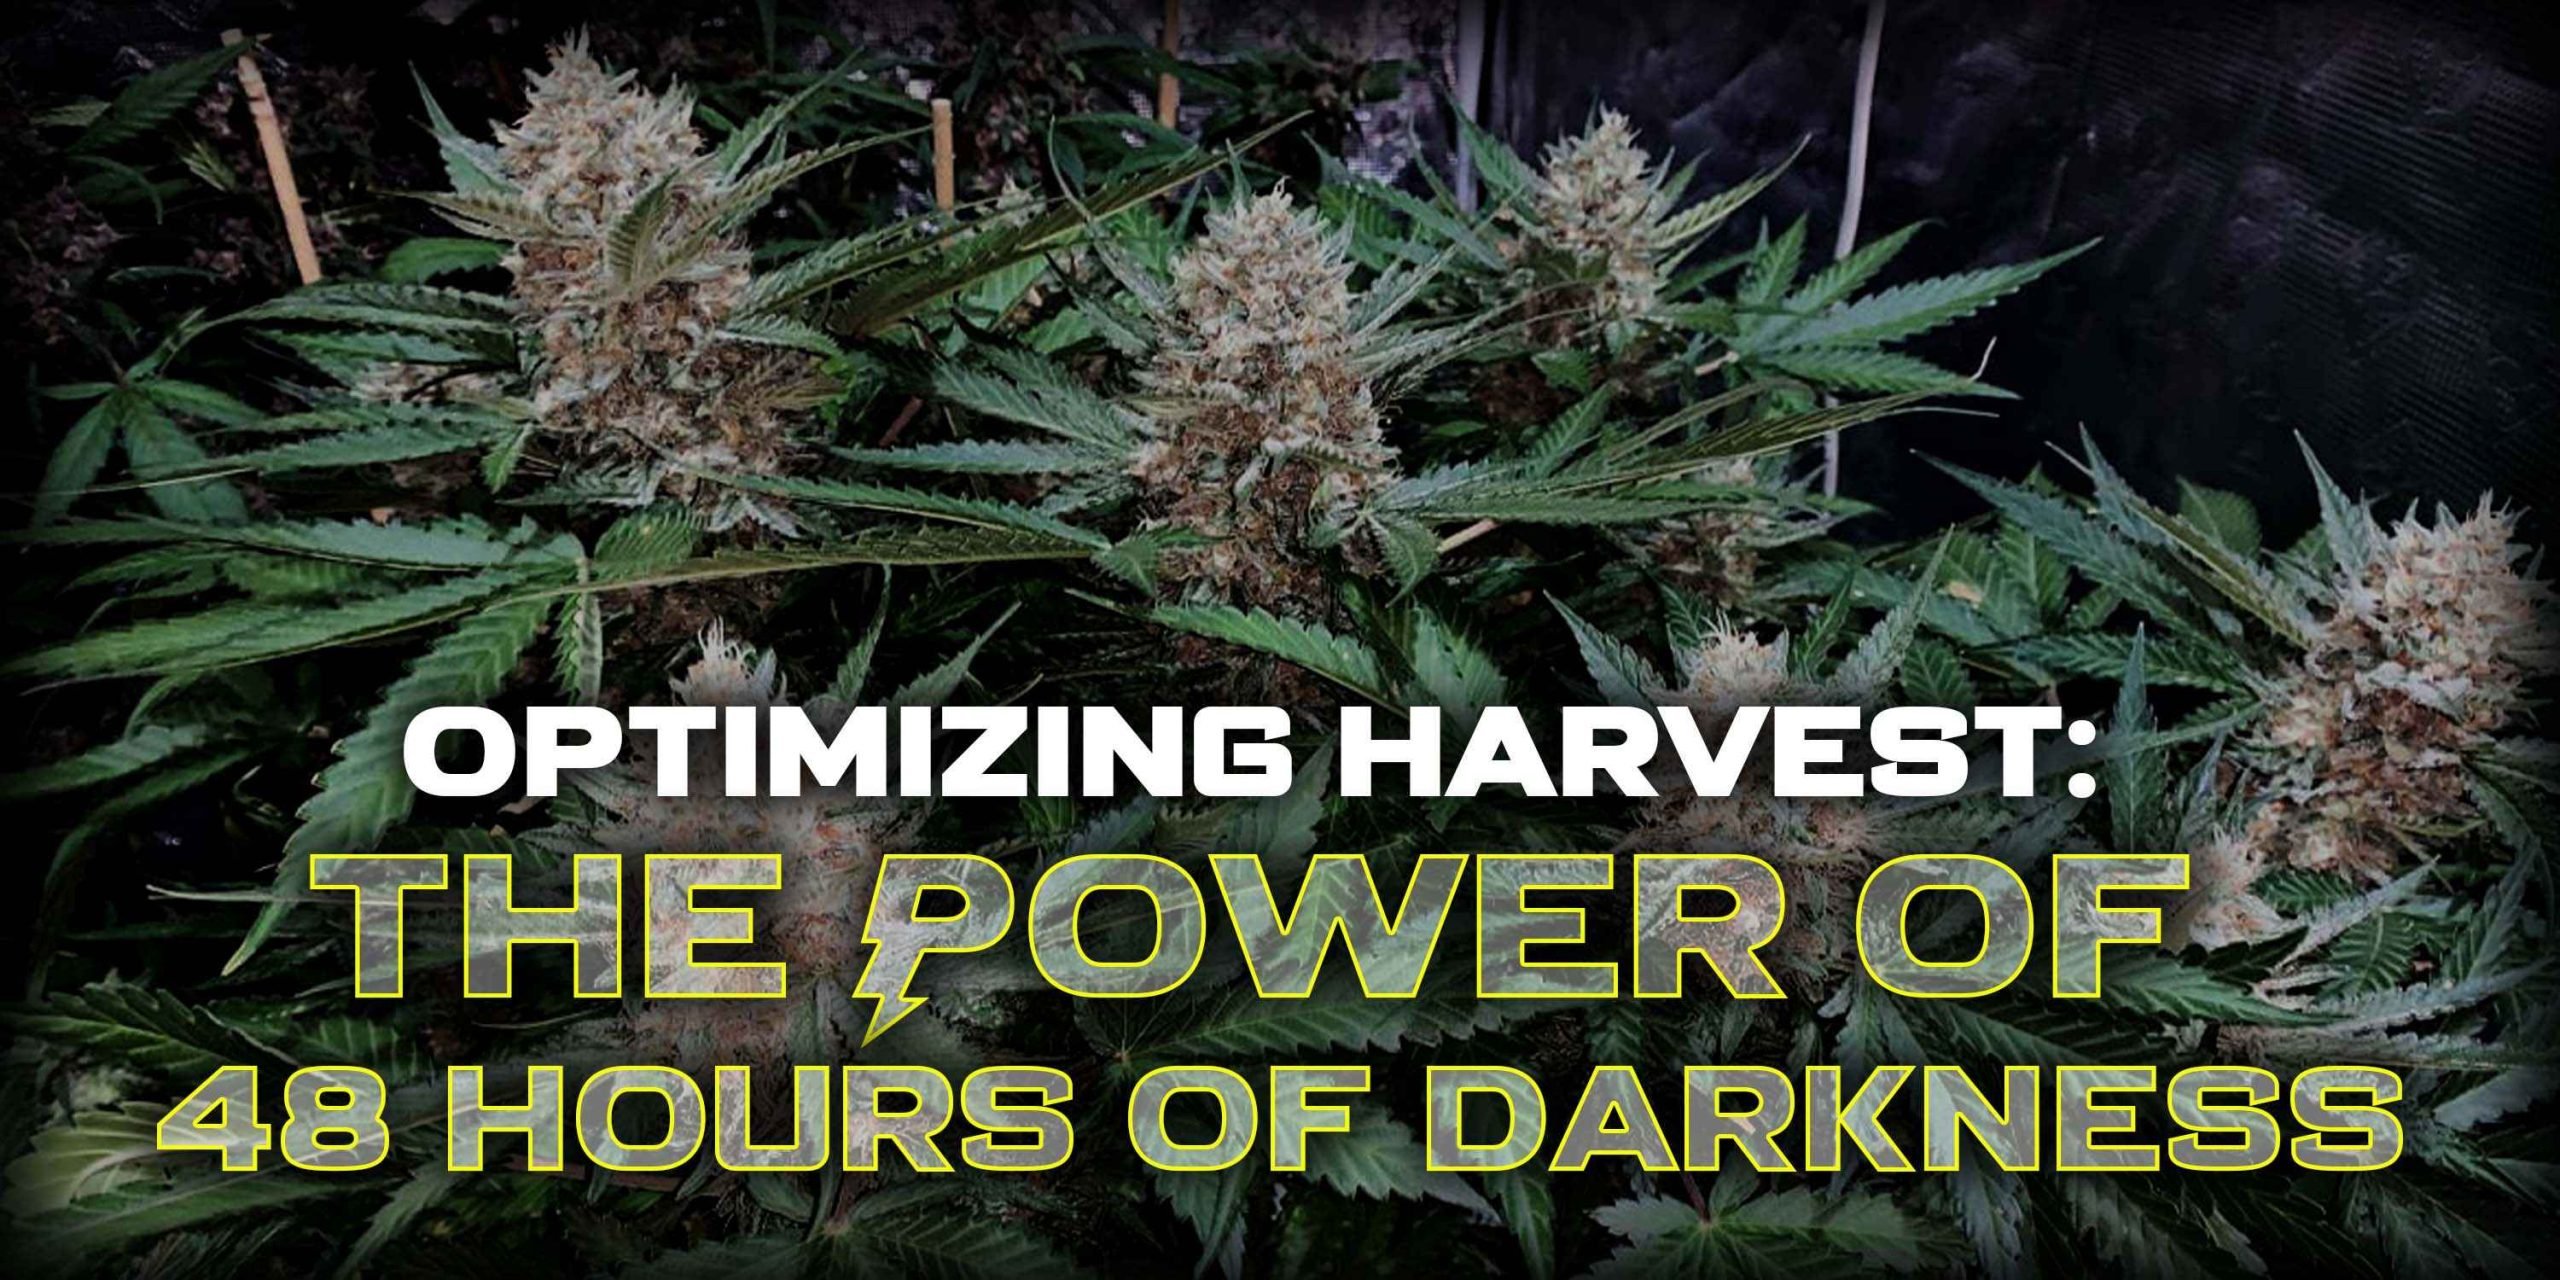 Freecompress Optimizing Harvest The Power Of 48 Hours Of Darkness Scaled, Crop King Seeds